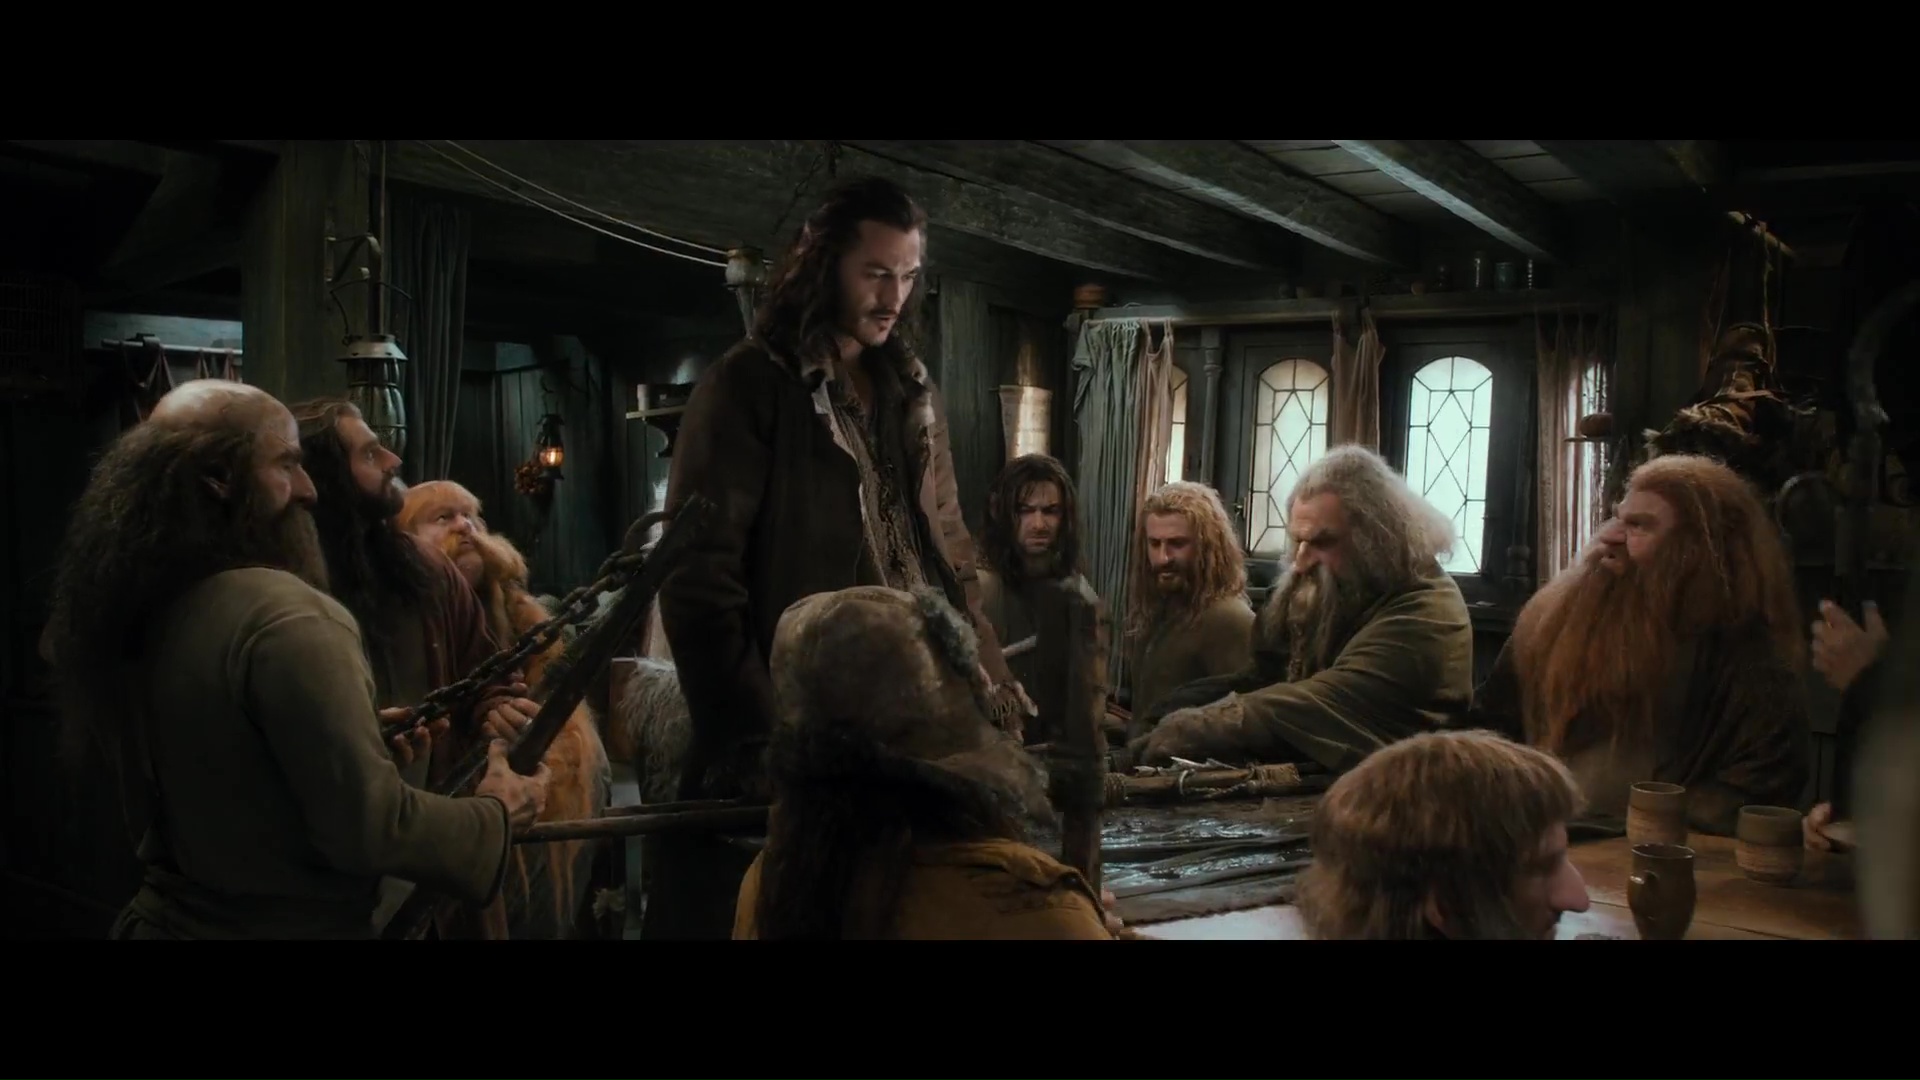 for ios download The Hobbit: The Desolation of Smaug